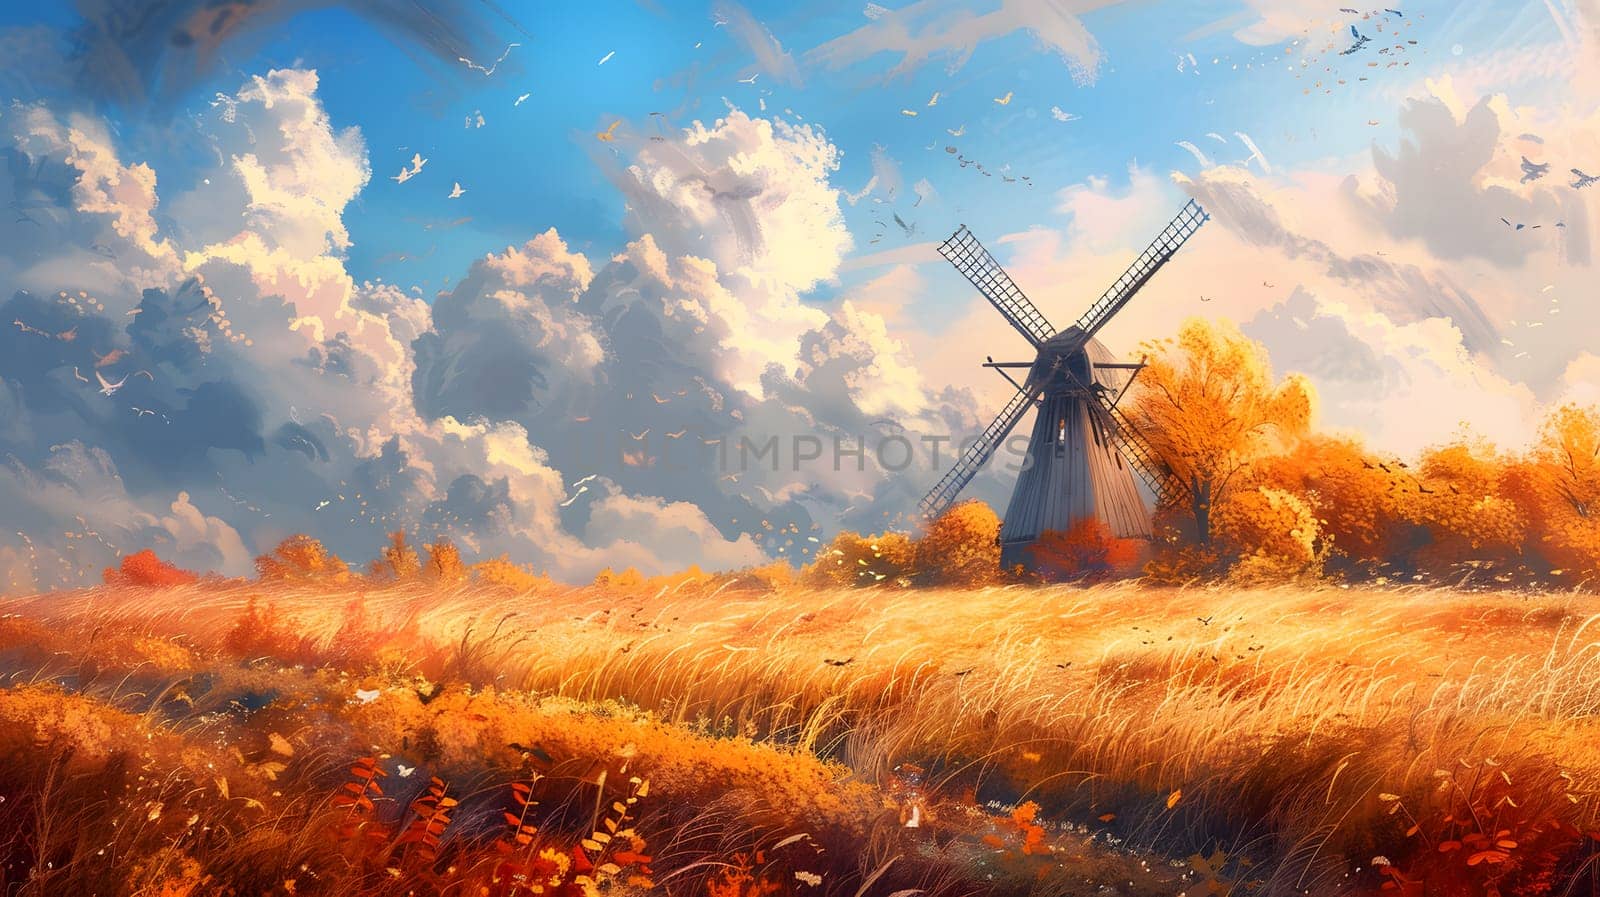 An elegant windmill stands tall in the midst of a wheat field, with fluffy clouds drifting in the blue sky above. The natural landscape is a perfect canvas for a picturesque painting